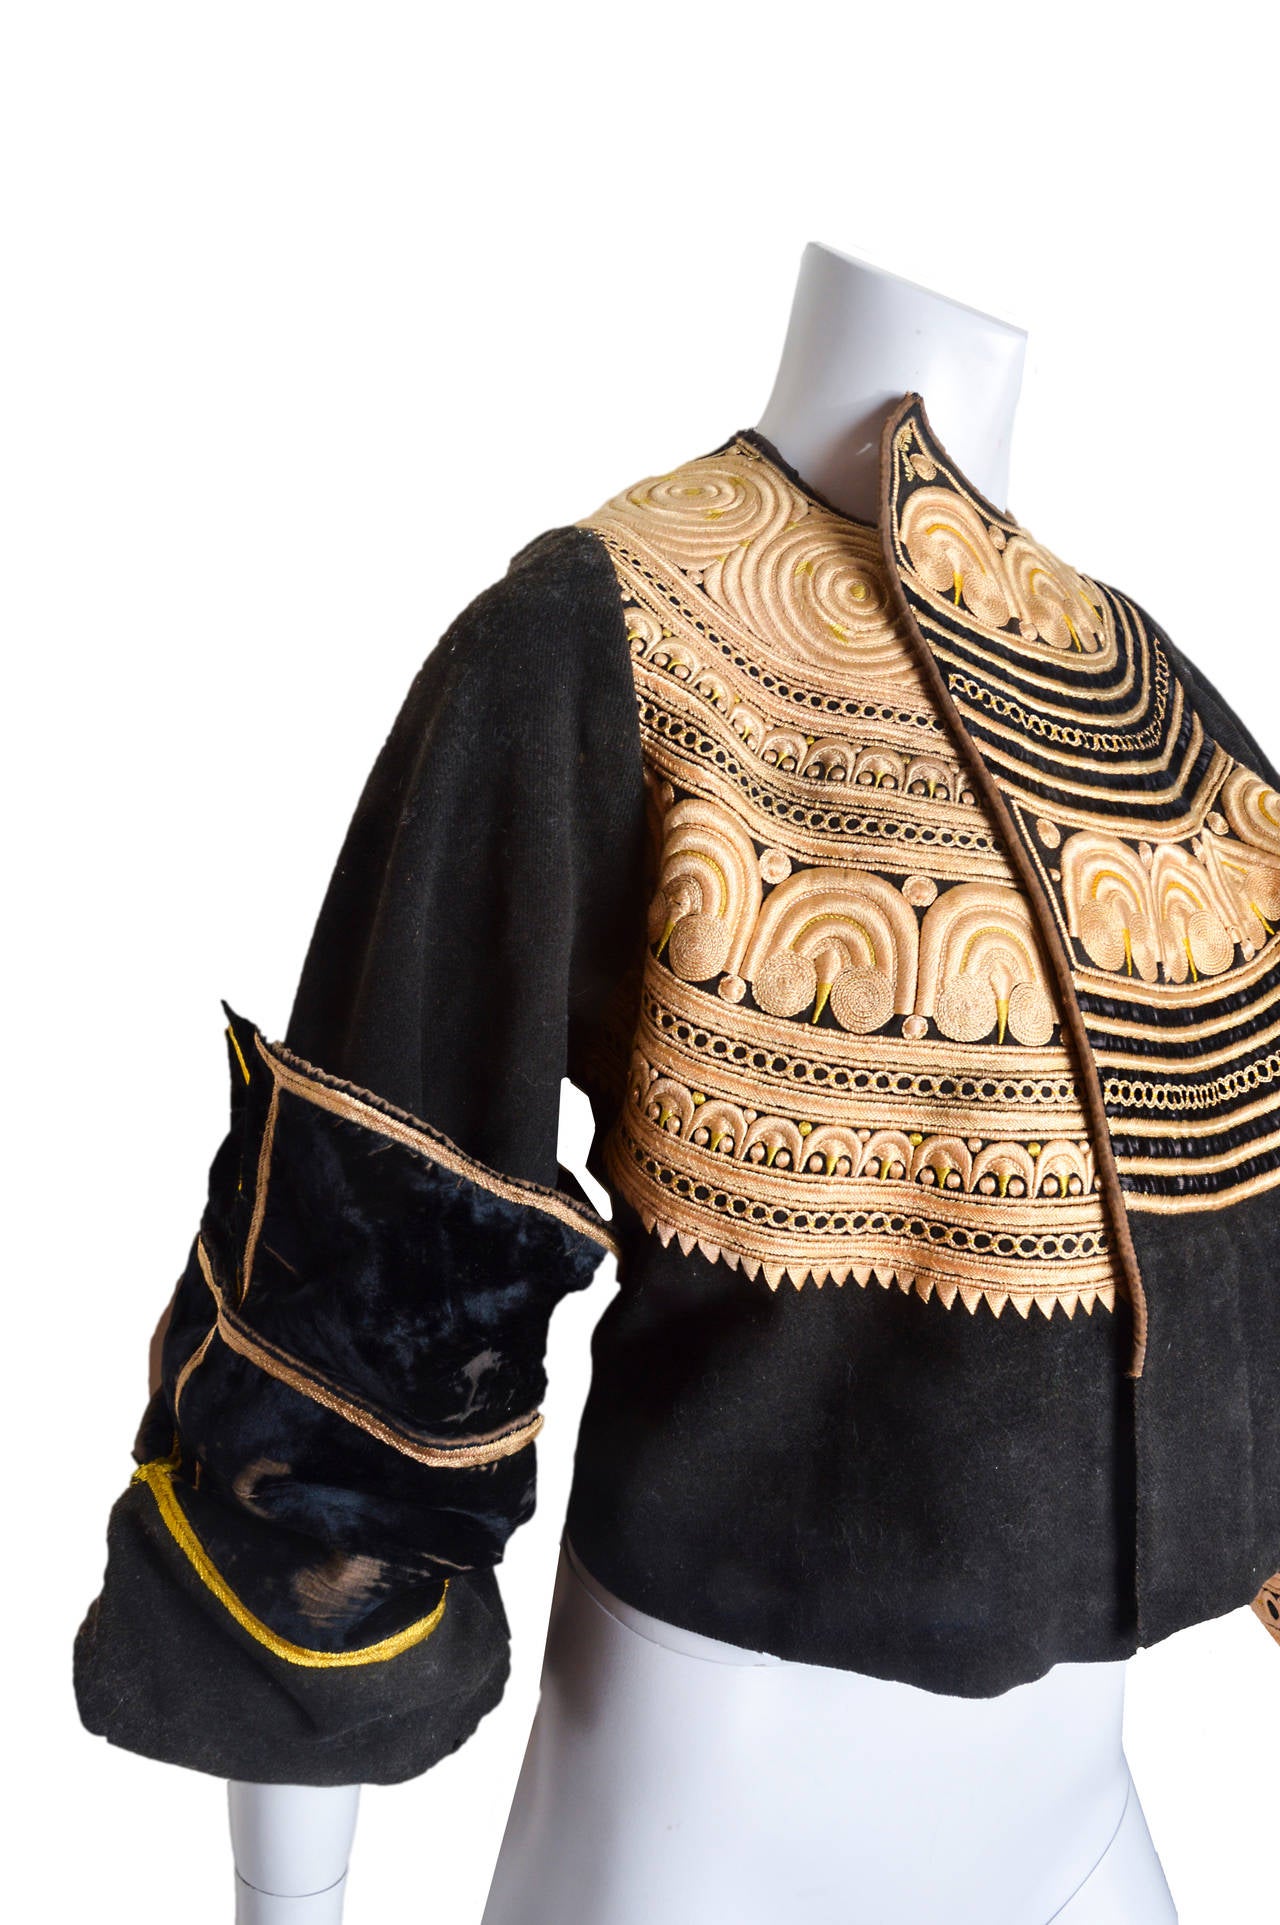 Women's or Men's Antique Decorative Coat with Gold Embroidery